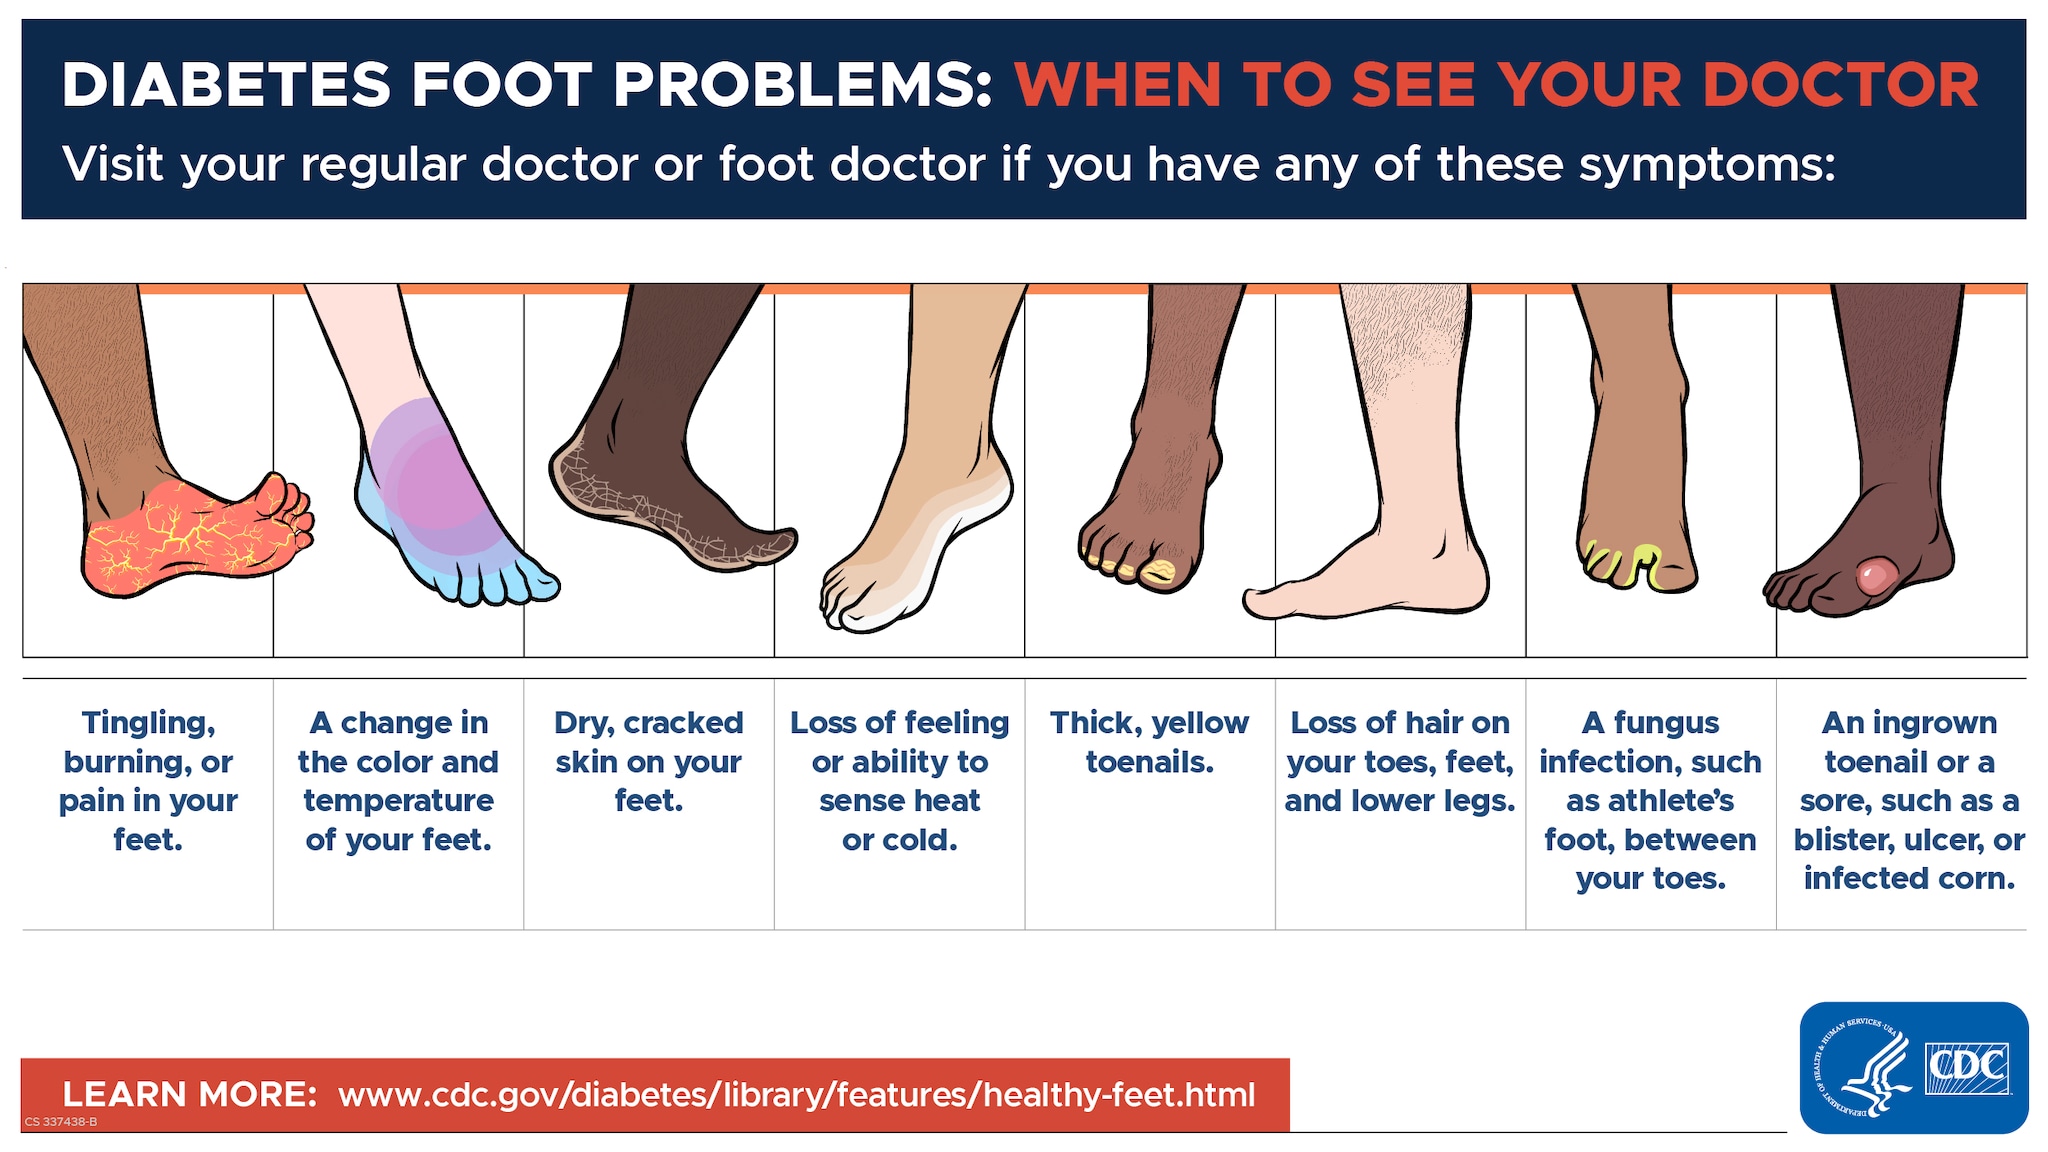 Visit your regular doctor or foot doctor if you have any of these symptoms.